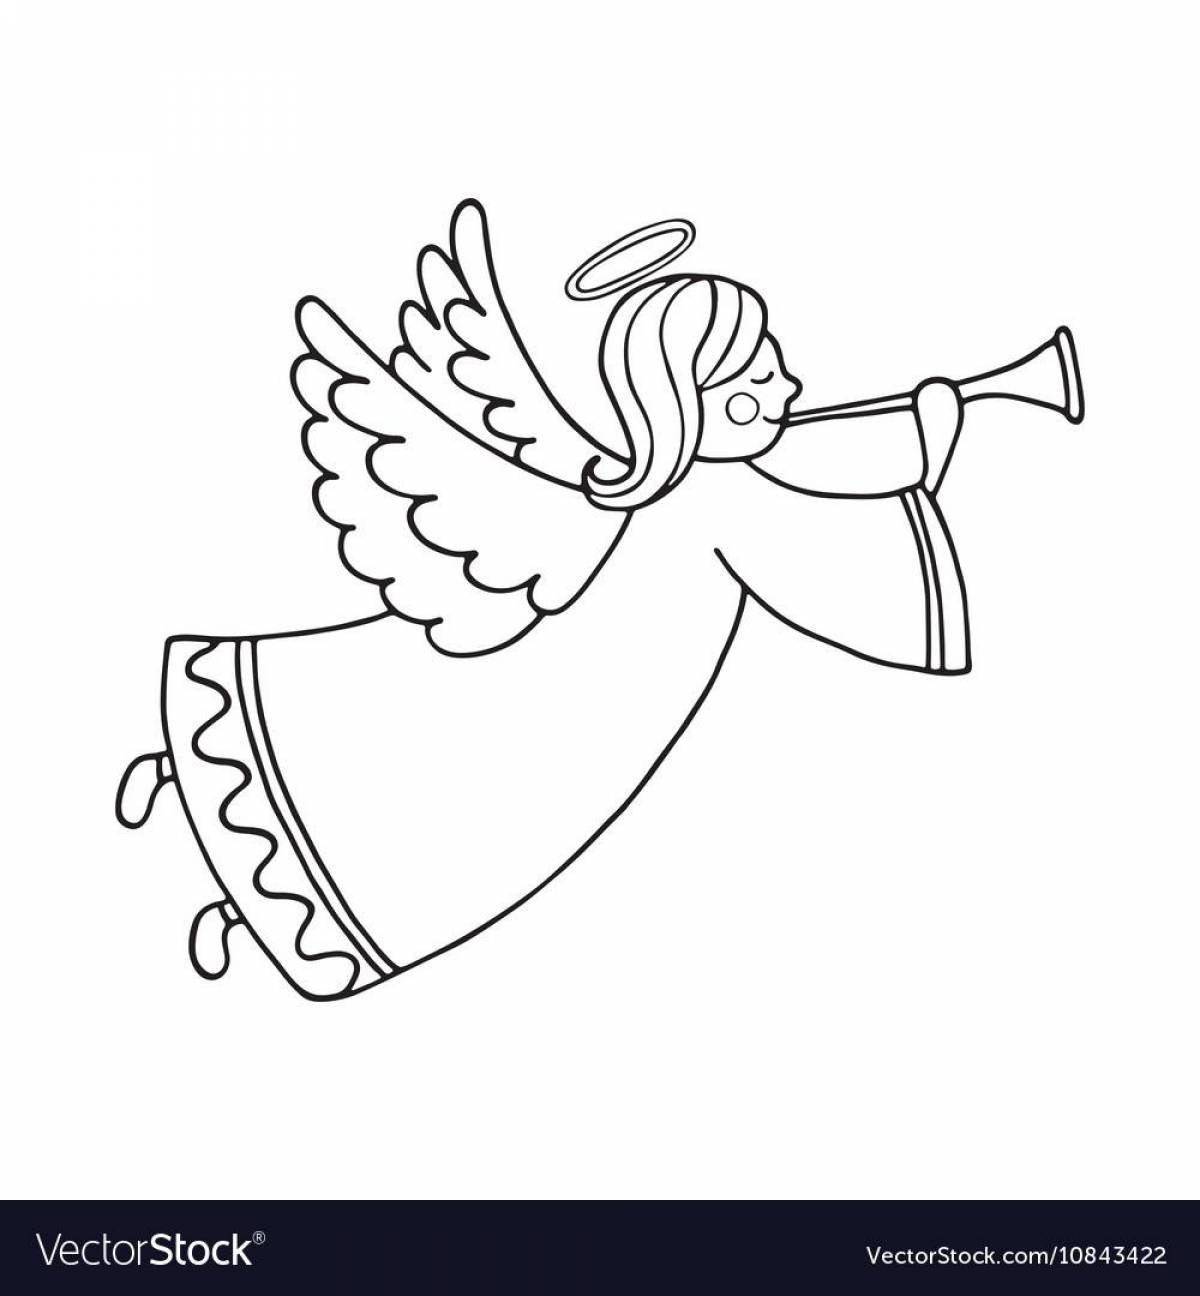 Splash coloring angel with wings for kids